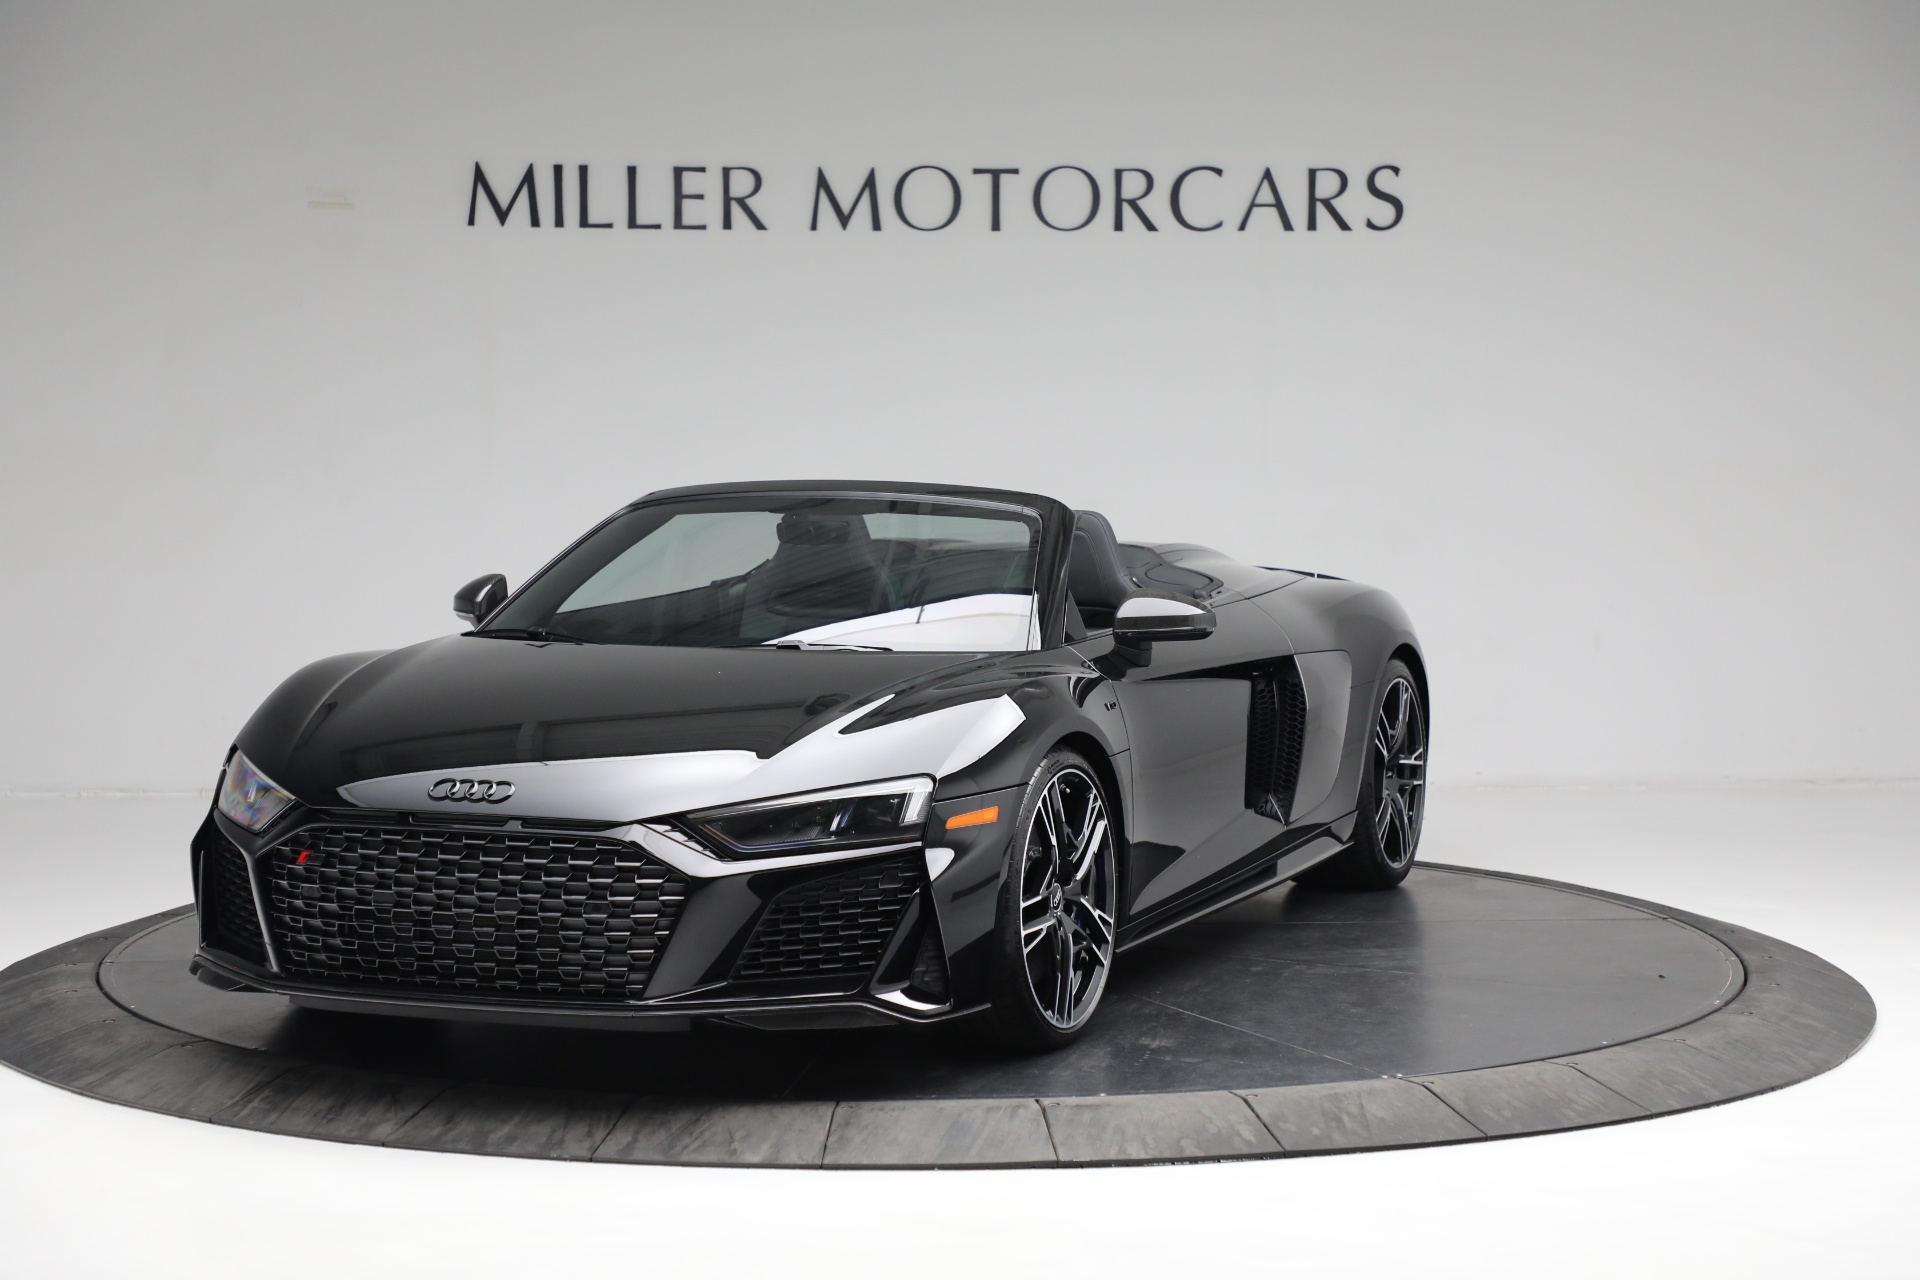 Used 2022 Audi R8 5.2 quattro V10 perform. Spyder for sale Sold at Bentley Greenwich in Greenwich CT 06830 1